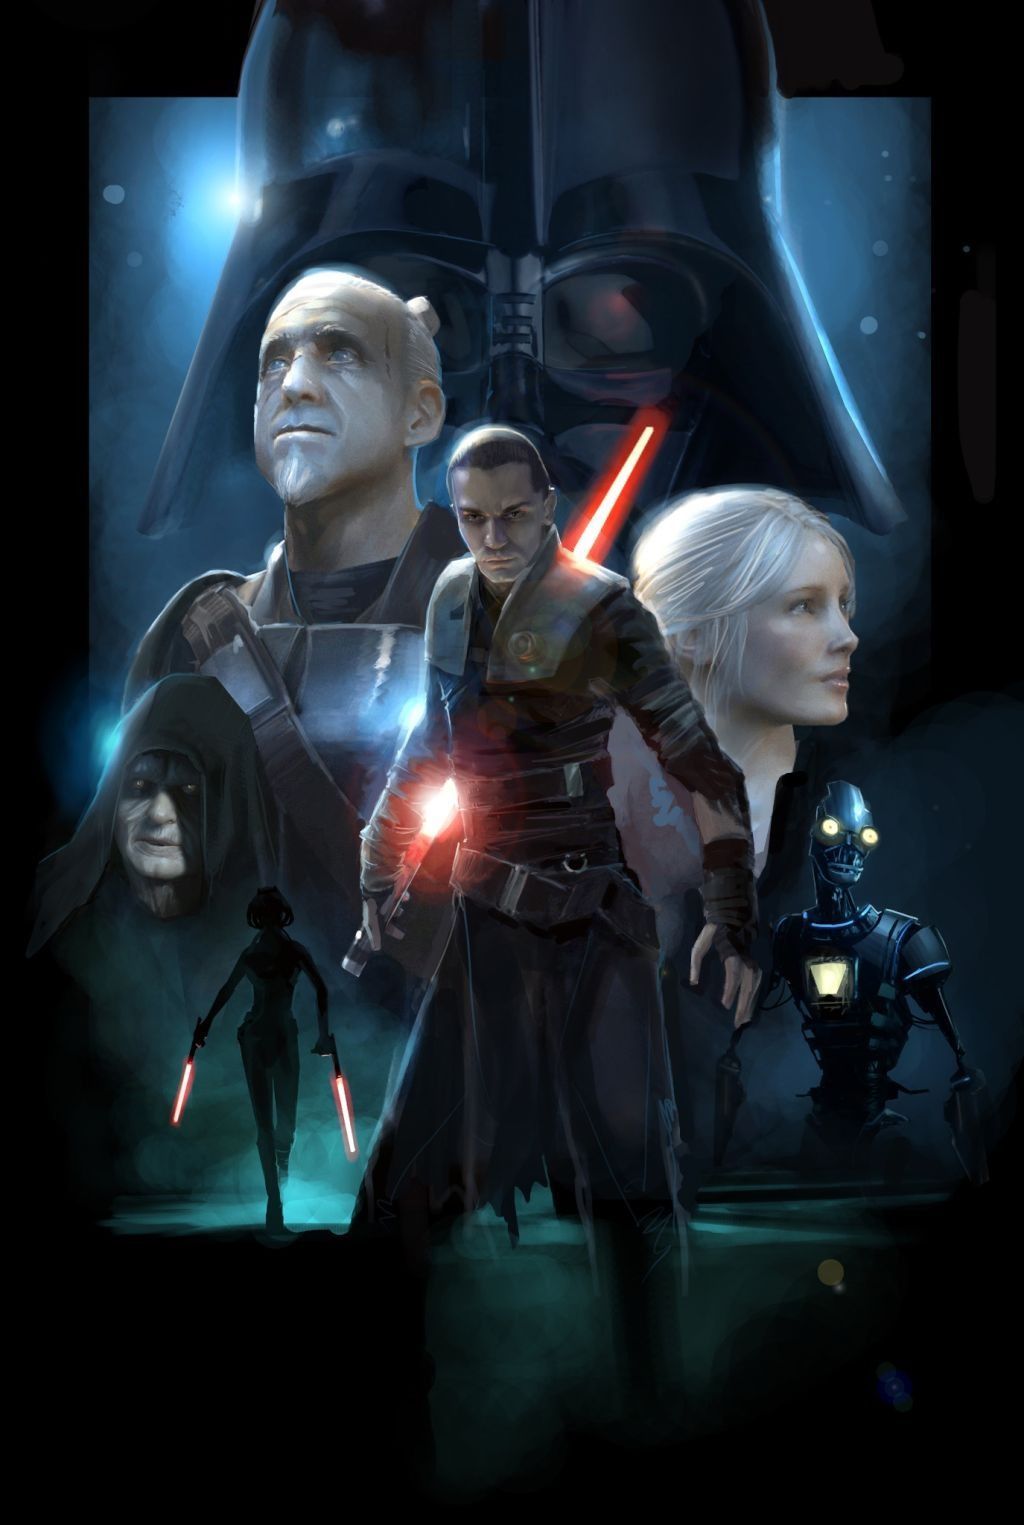 Star Wars The Force Unleashed ideas. the force unleashed, star wars, war